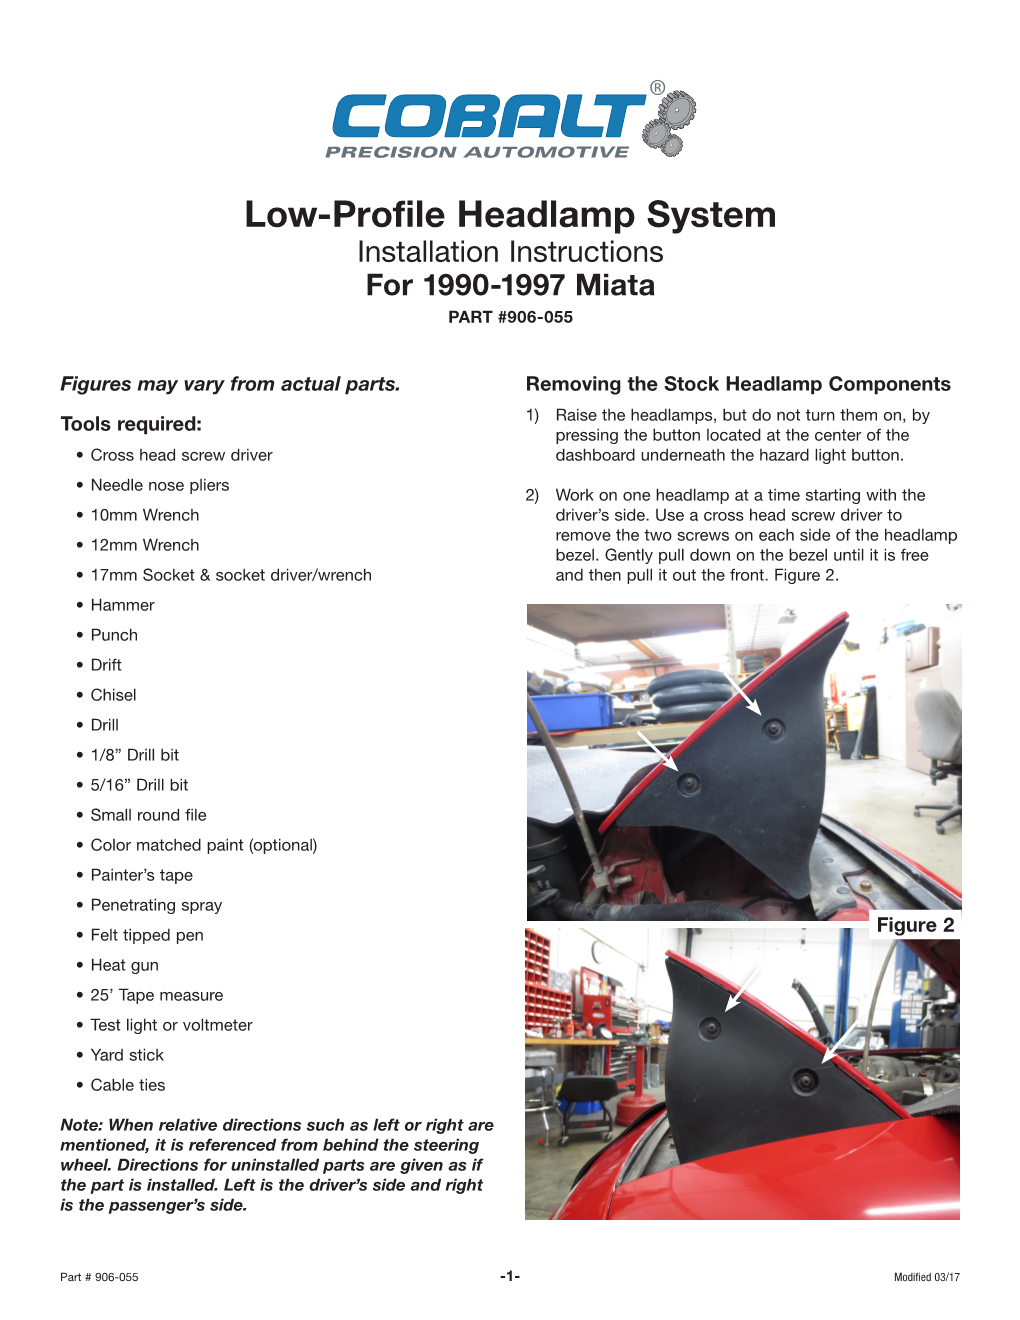 Low-Profile Headlamp System Installation Instructions for 1990-1997 Miata PART #906-055